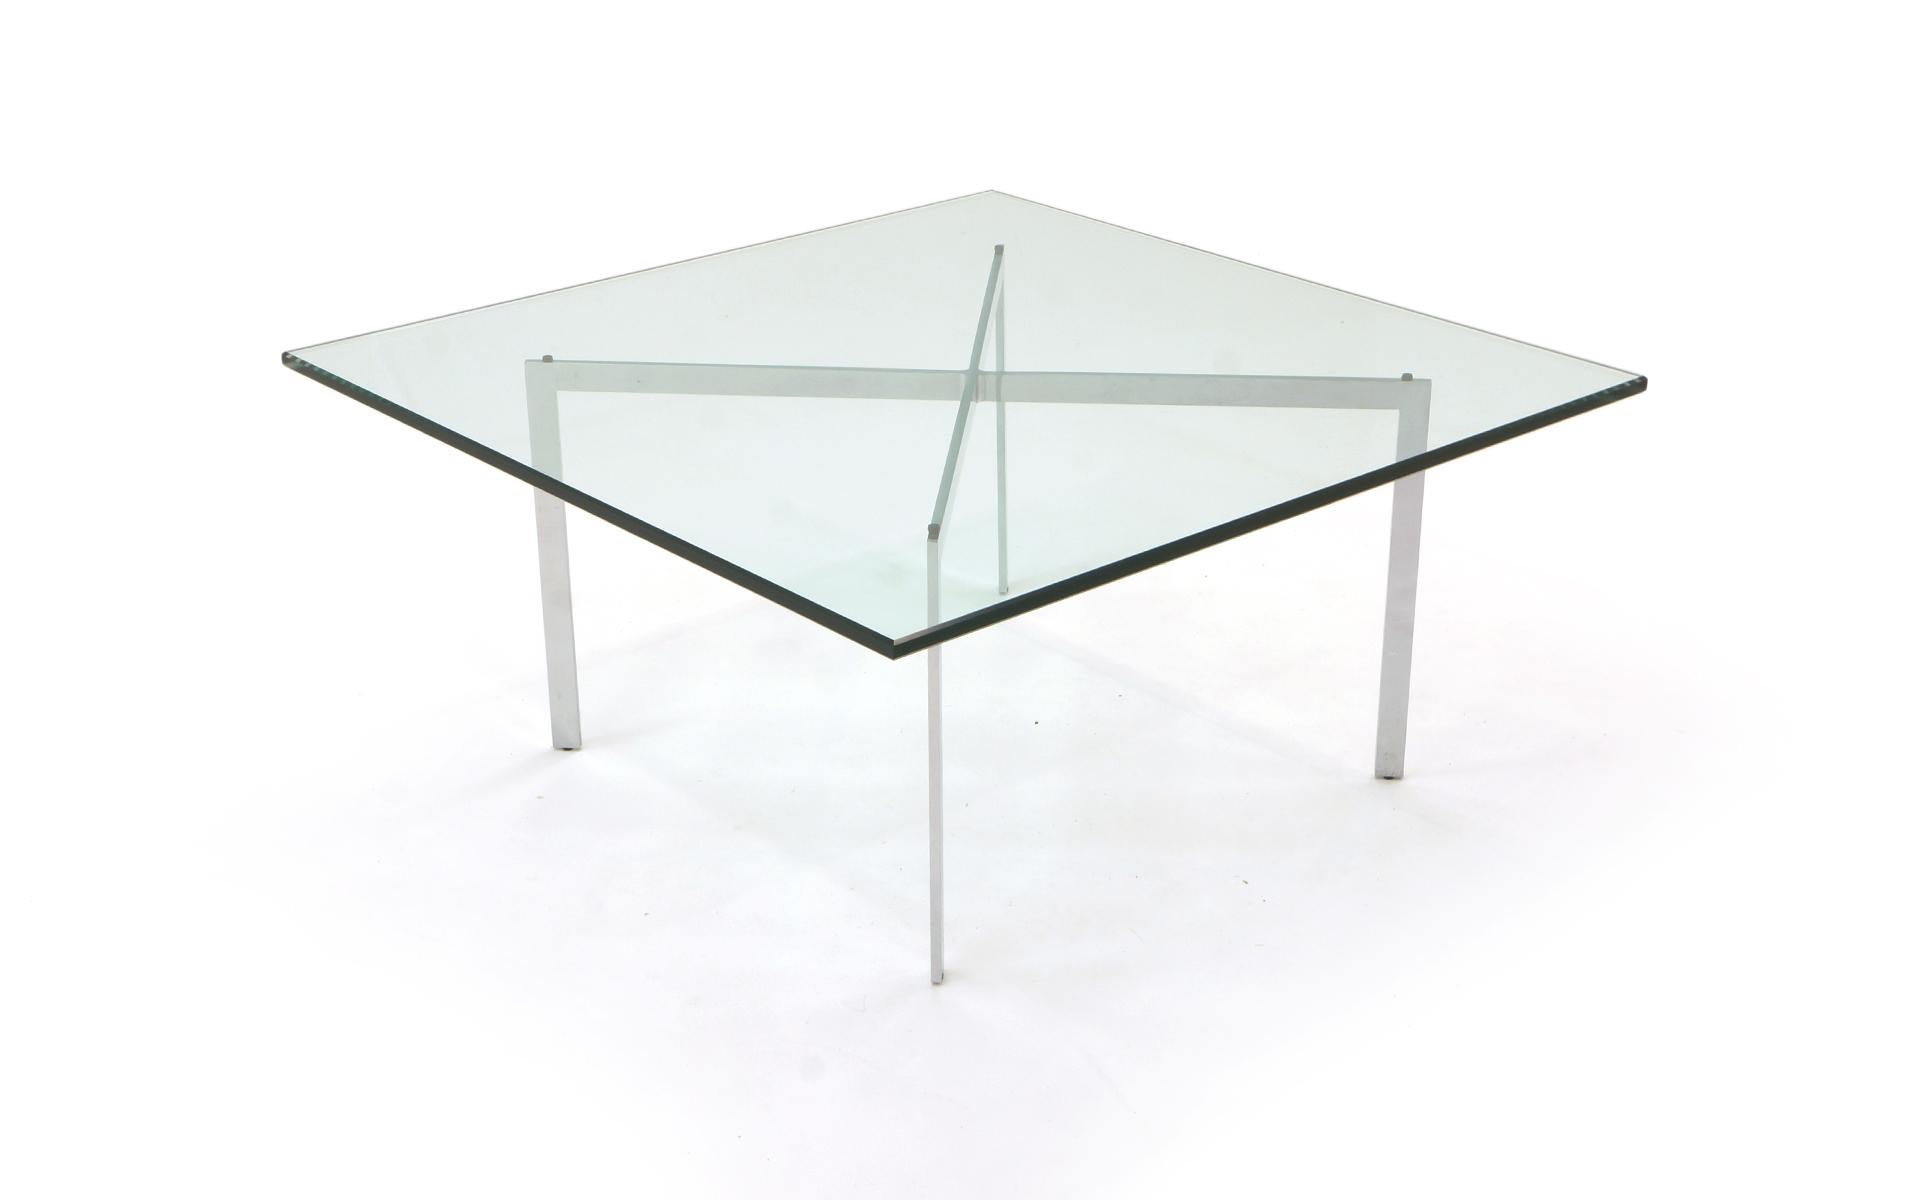 Barcelona style coffee table. No chips, or distracting scratches to the top. Looks close to new. Very high quality constructed chromed steel base and 1/2